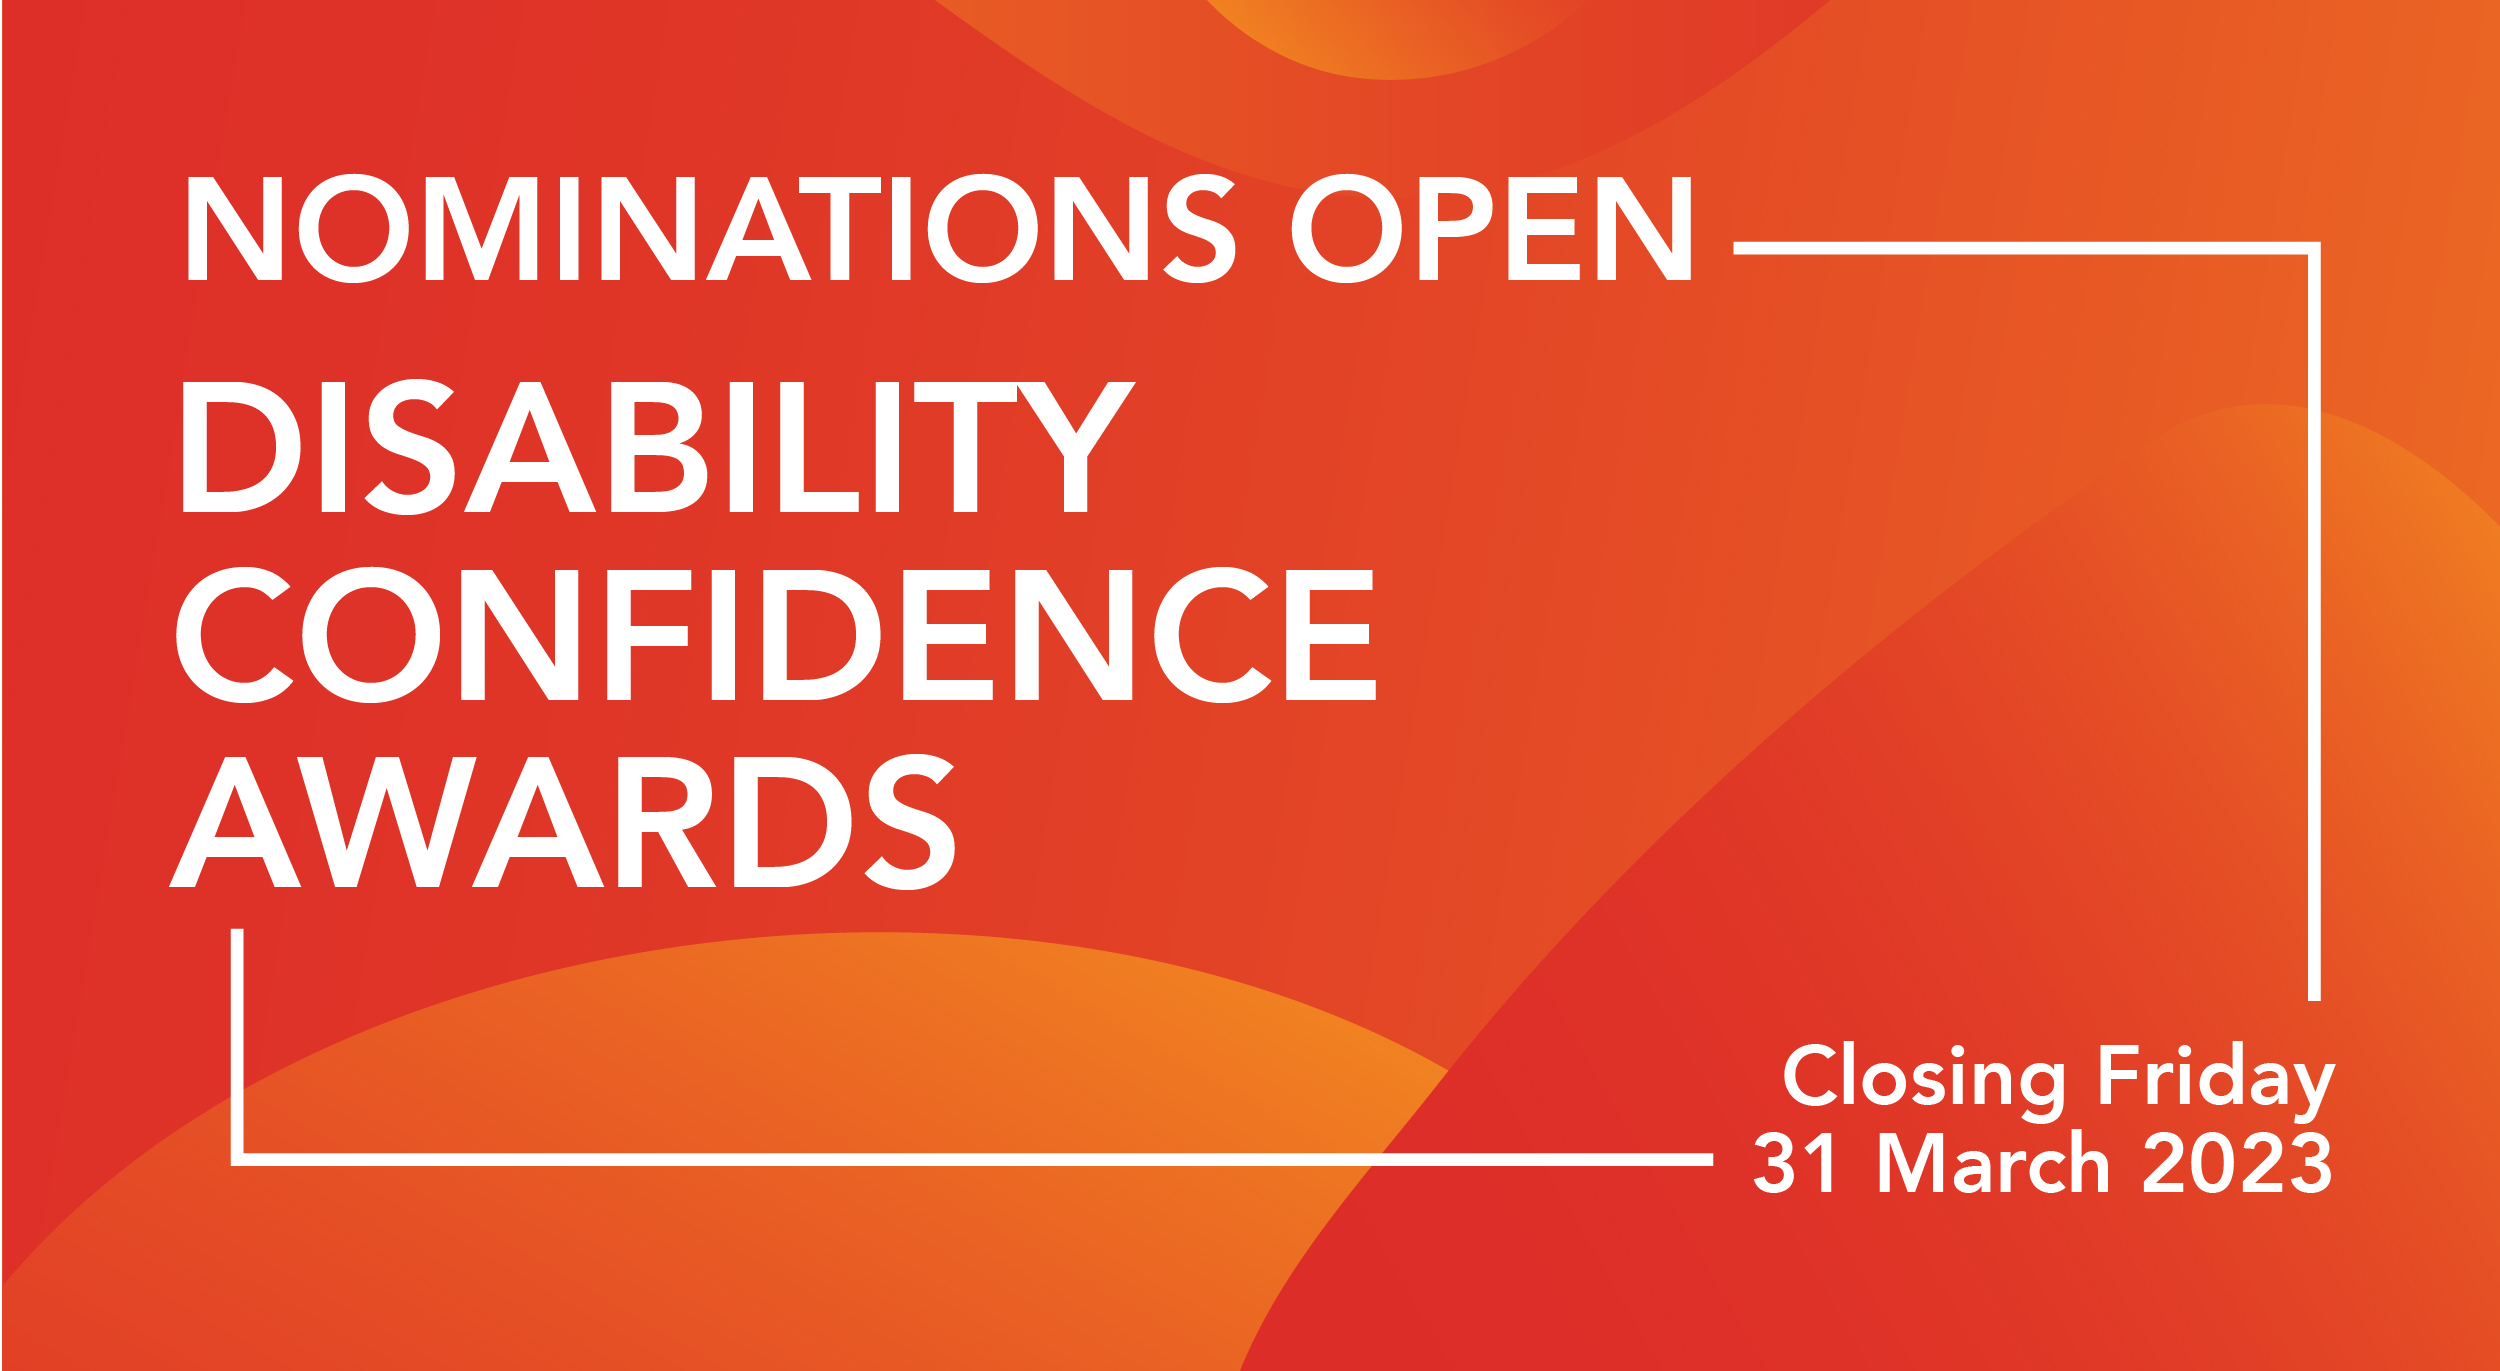 Nominations Open Disability Confidence Awards. Closes Friday 31 March 2023